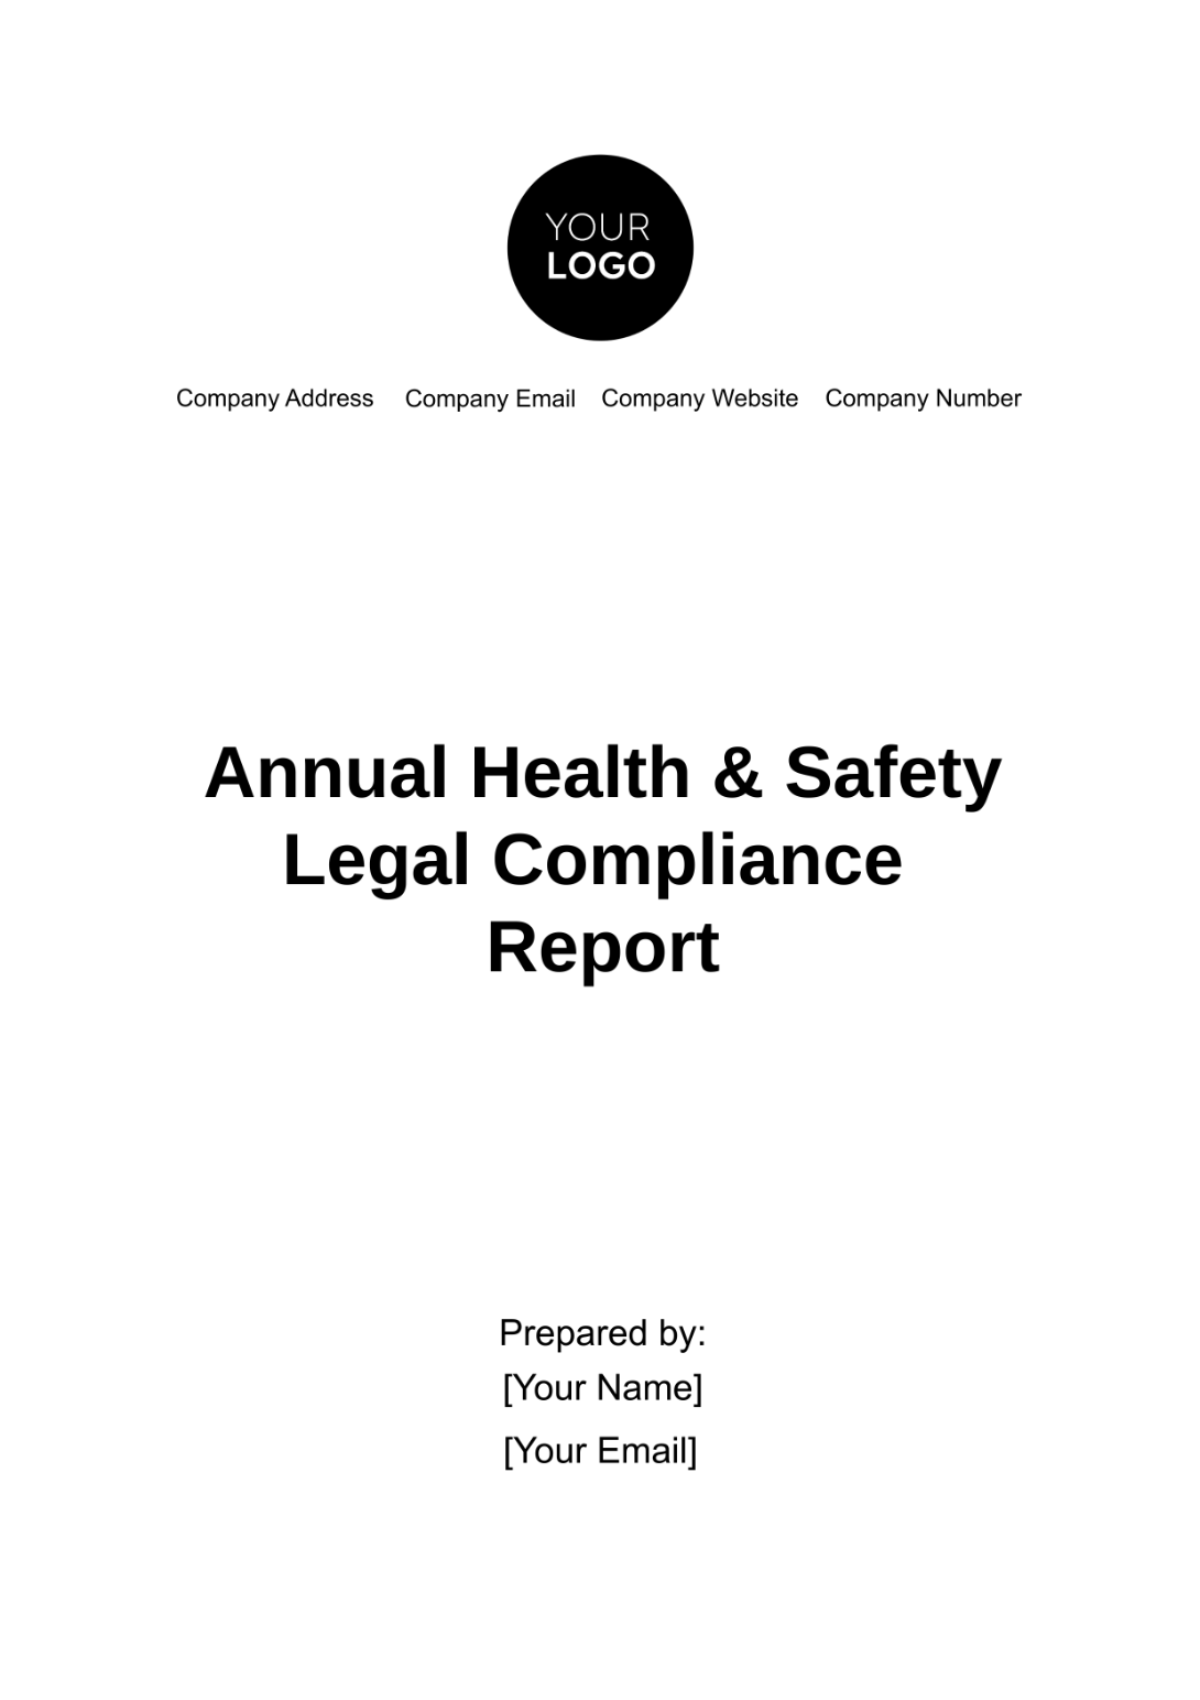 Annual Health & Safety Legal Compliance Report Template